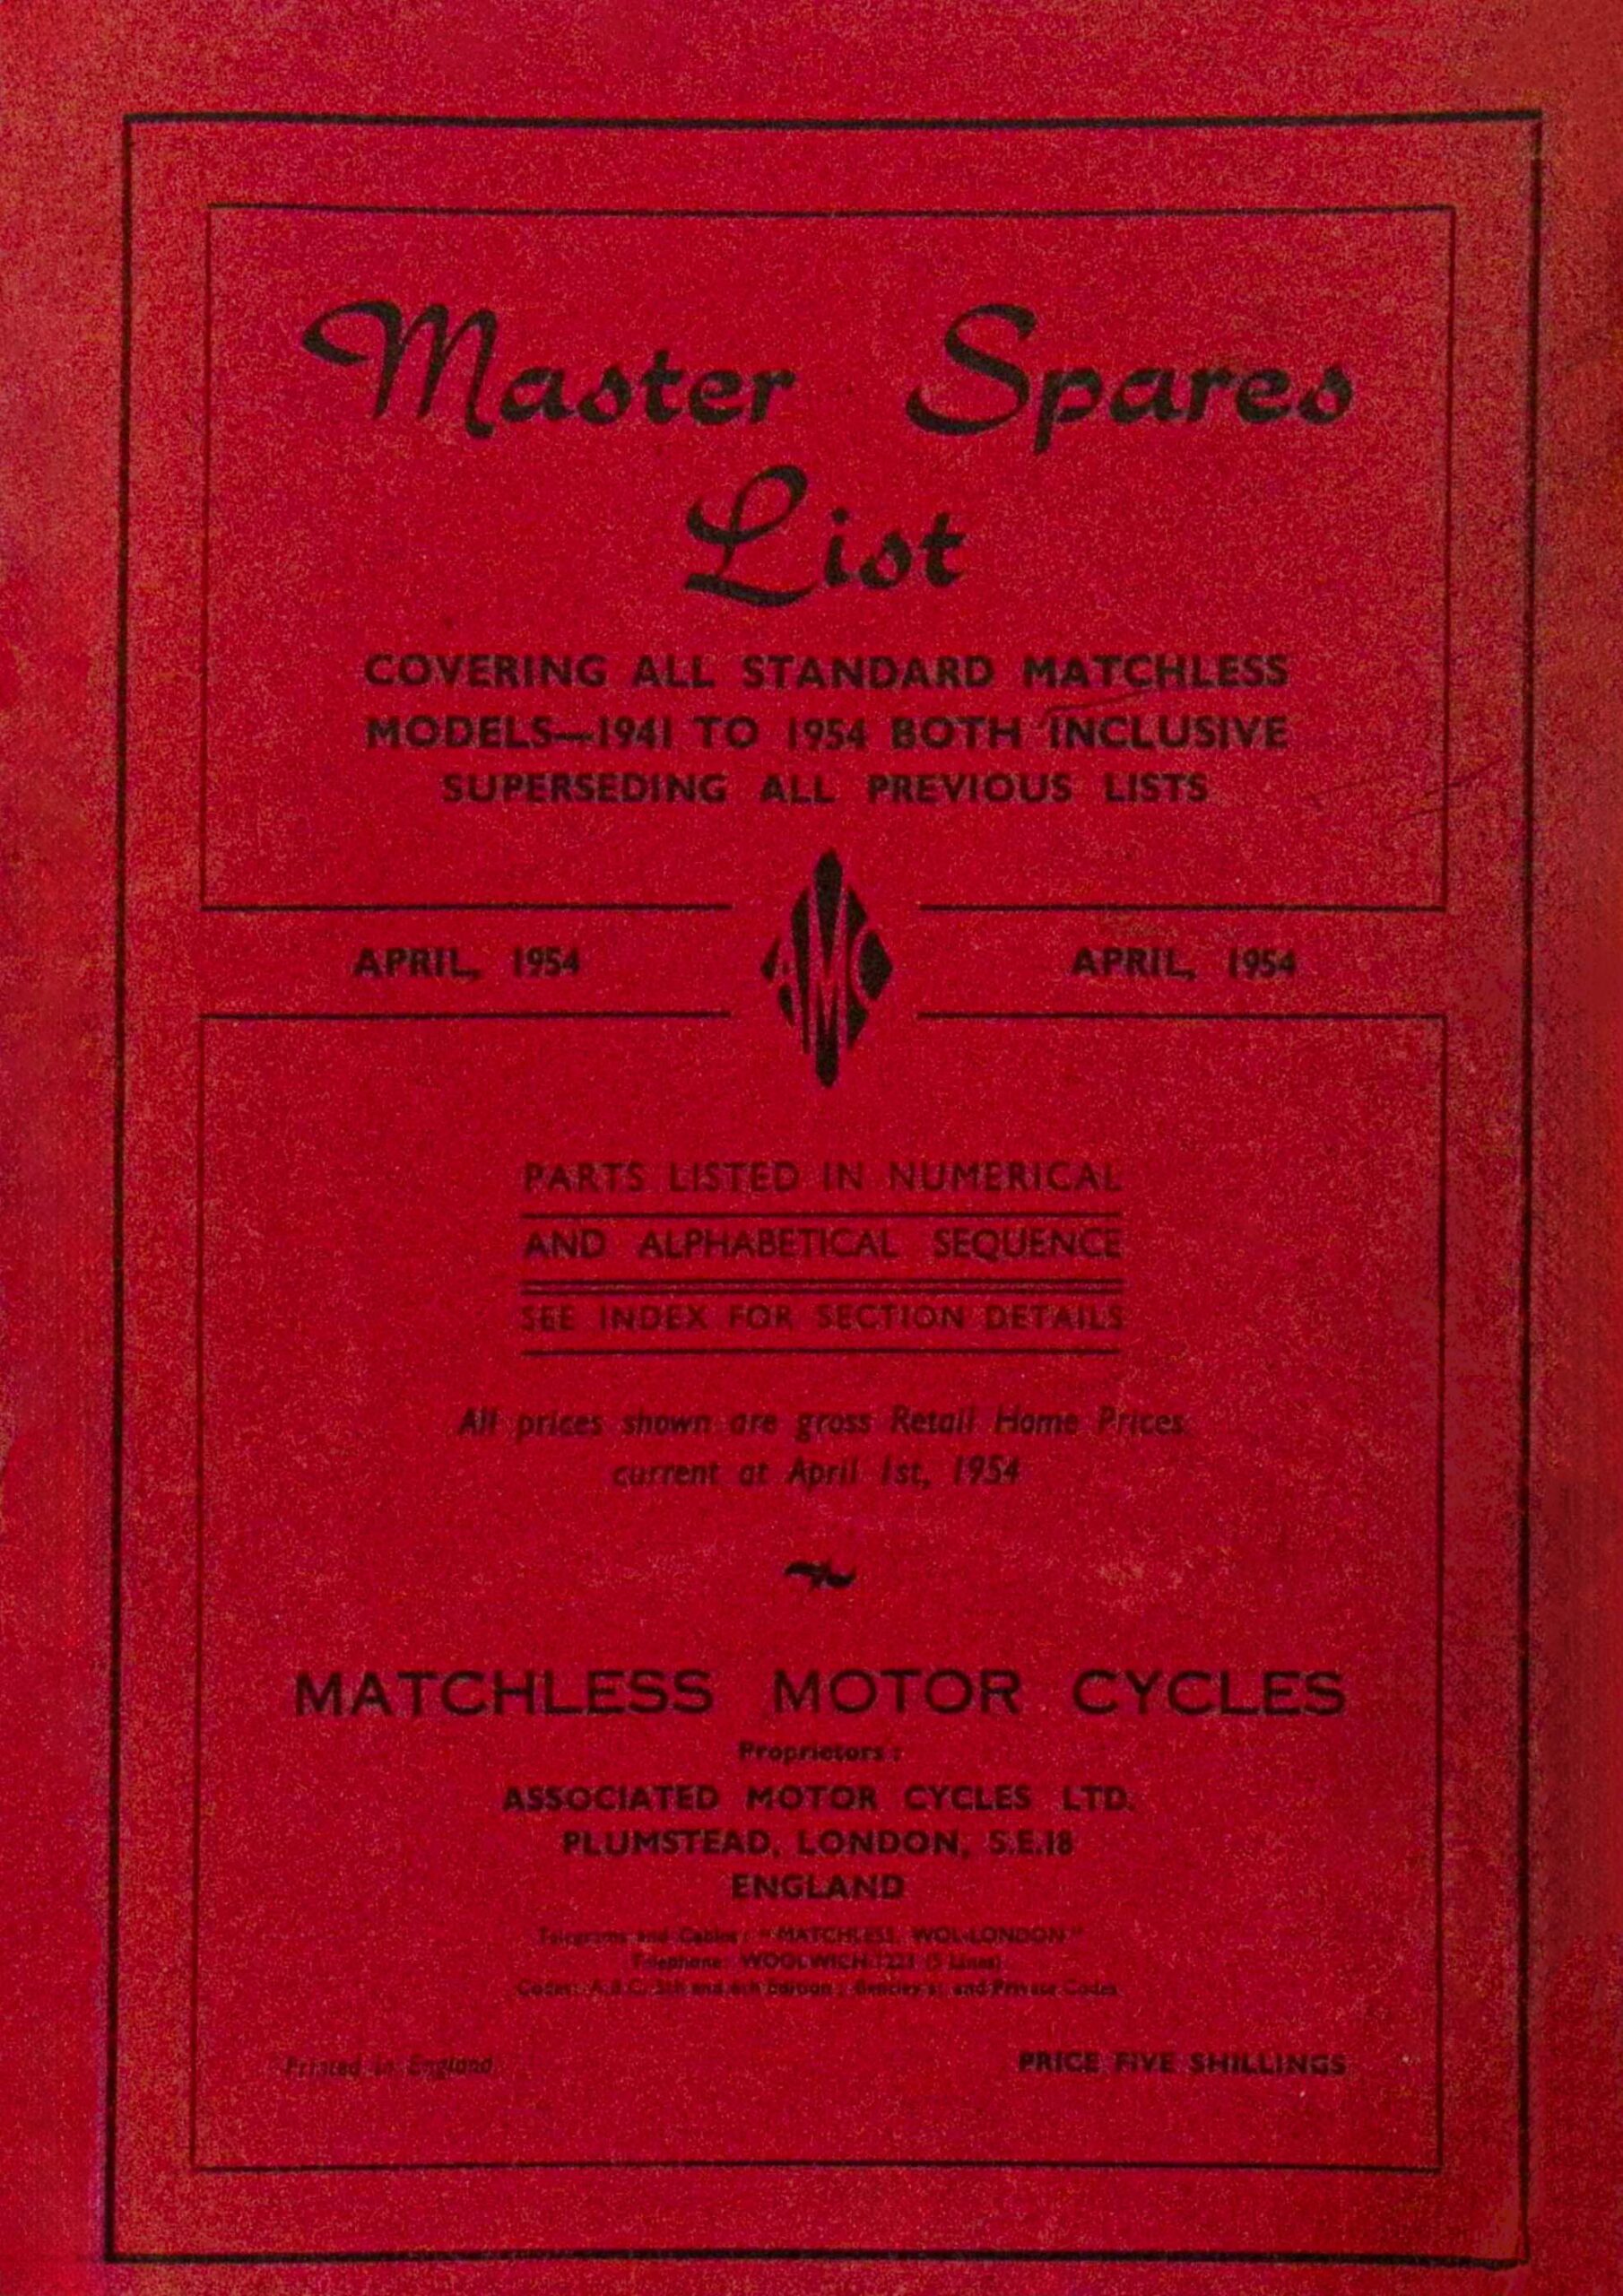 1941-1954 Matchless Master Spares List